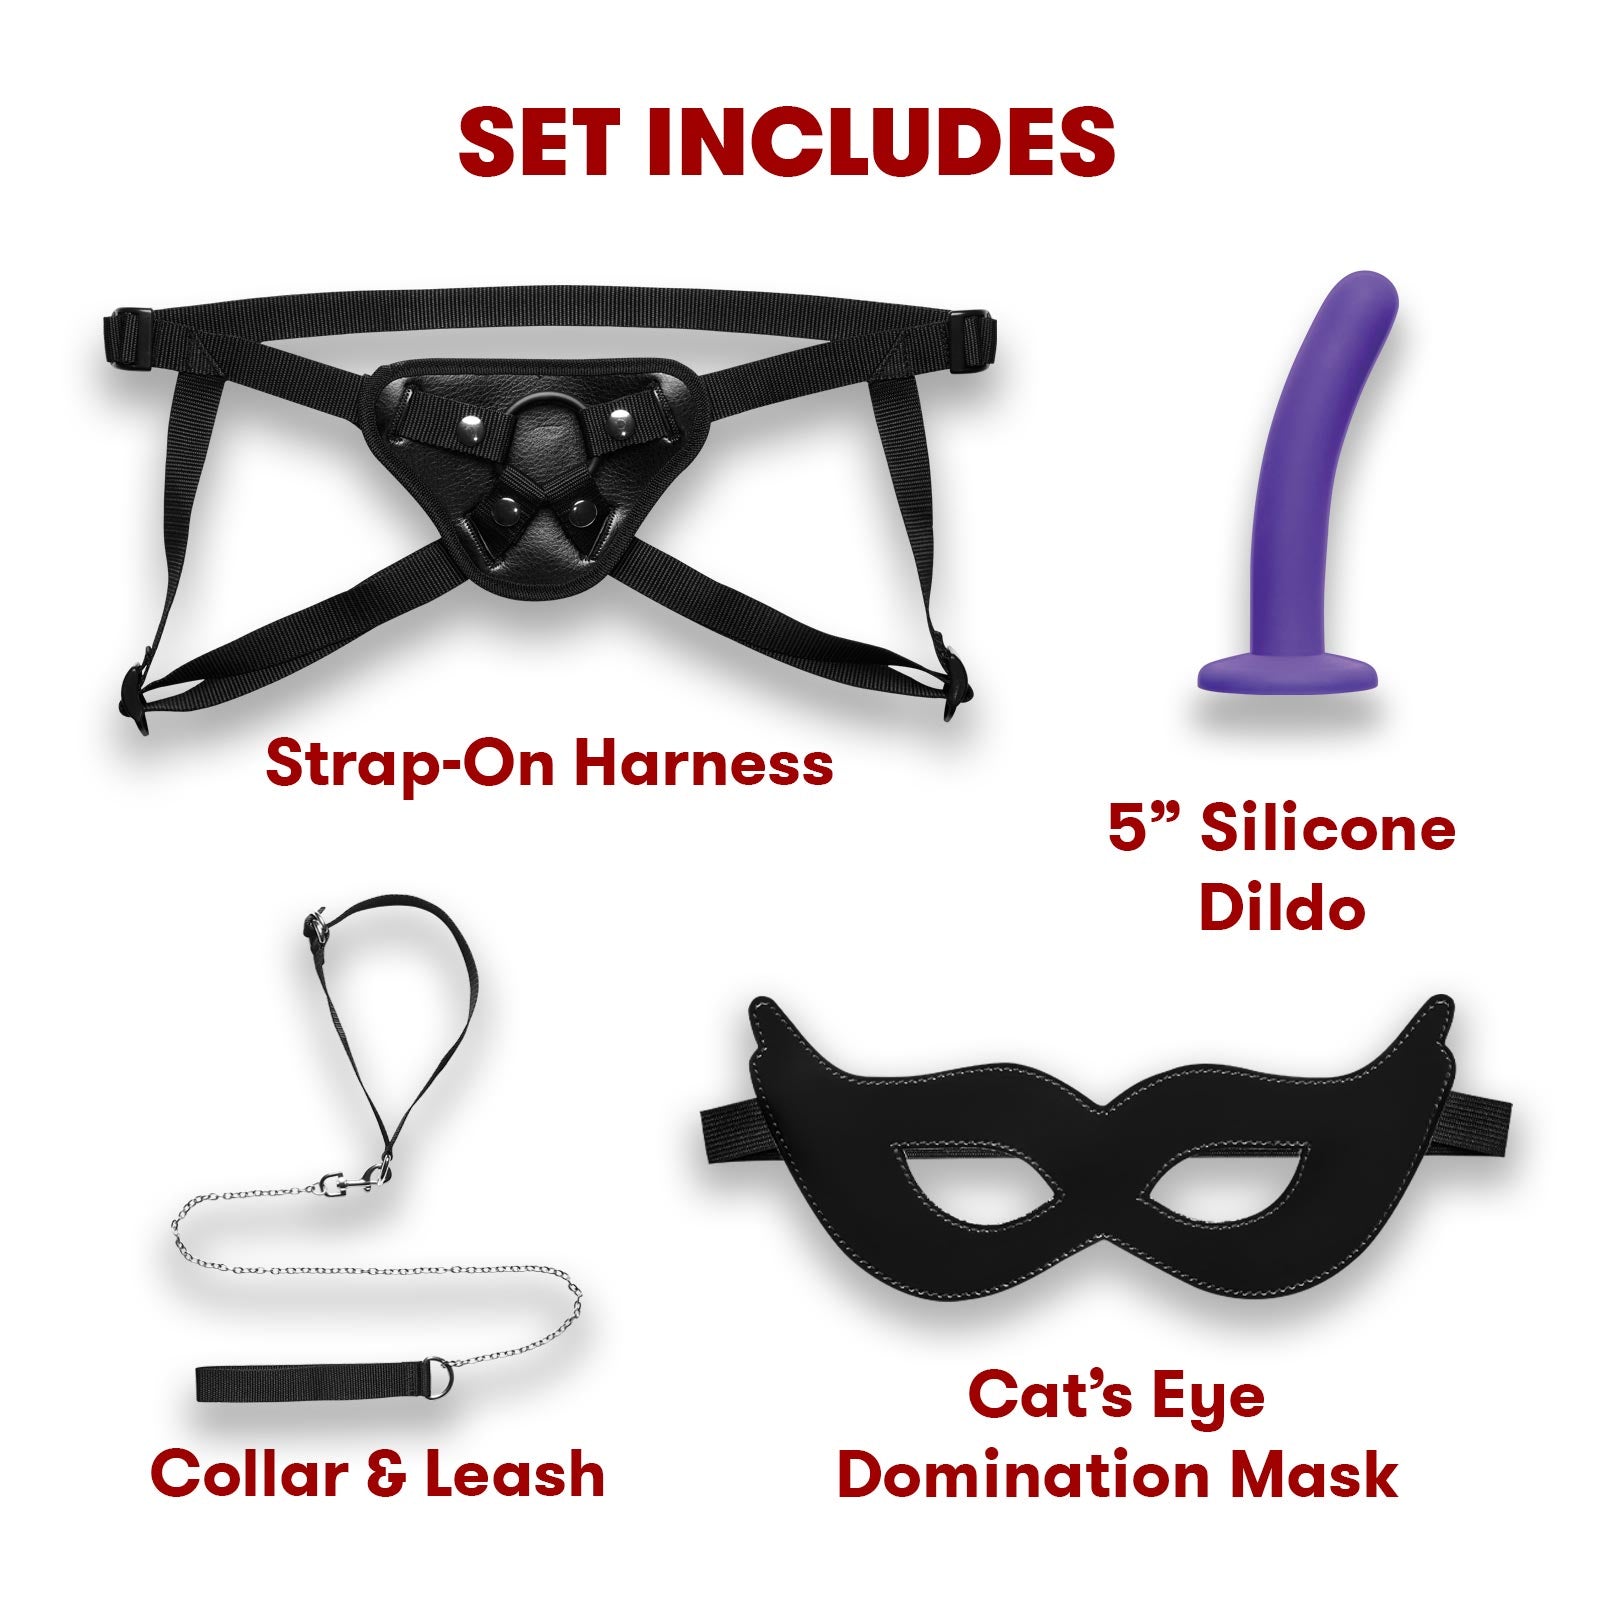 Lux Fetish Bondage-In-A-Box Everything You Need Bedspreader Complete 12-Piece Set at glastoy.com